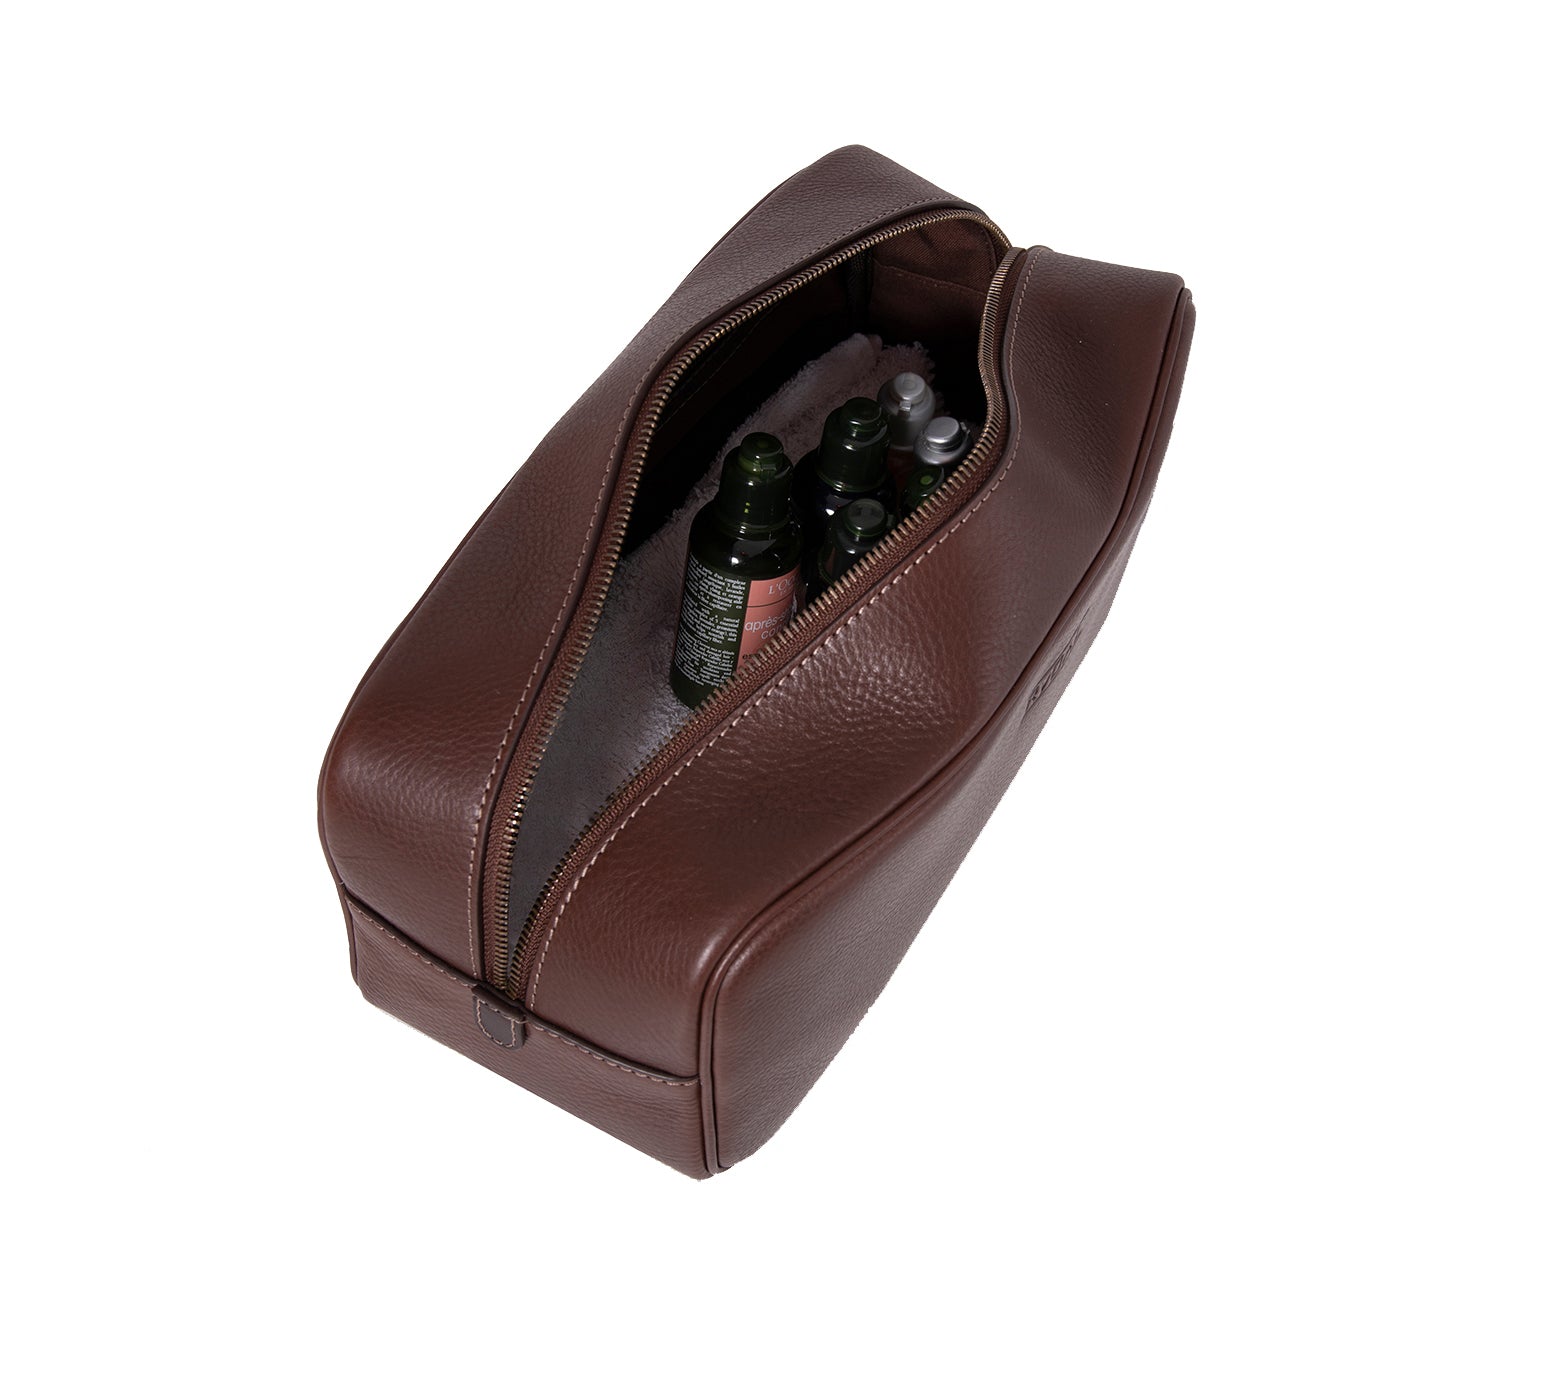 Mens Leather Wash Bag from Rydal in 'Dark Brown' showing toiletries.